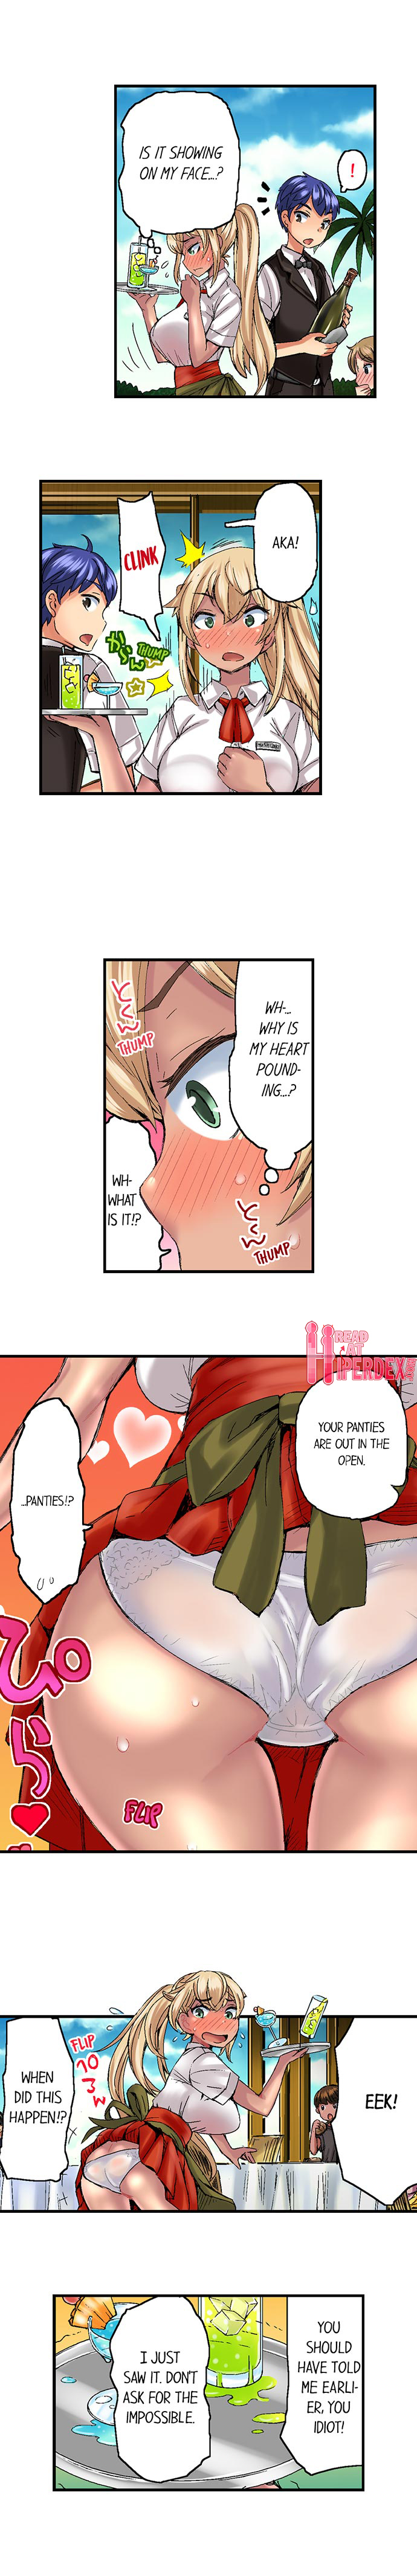 Taking a Hot Tanned Chick’s Virginity - Chapter 13 Page 3